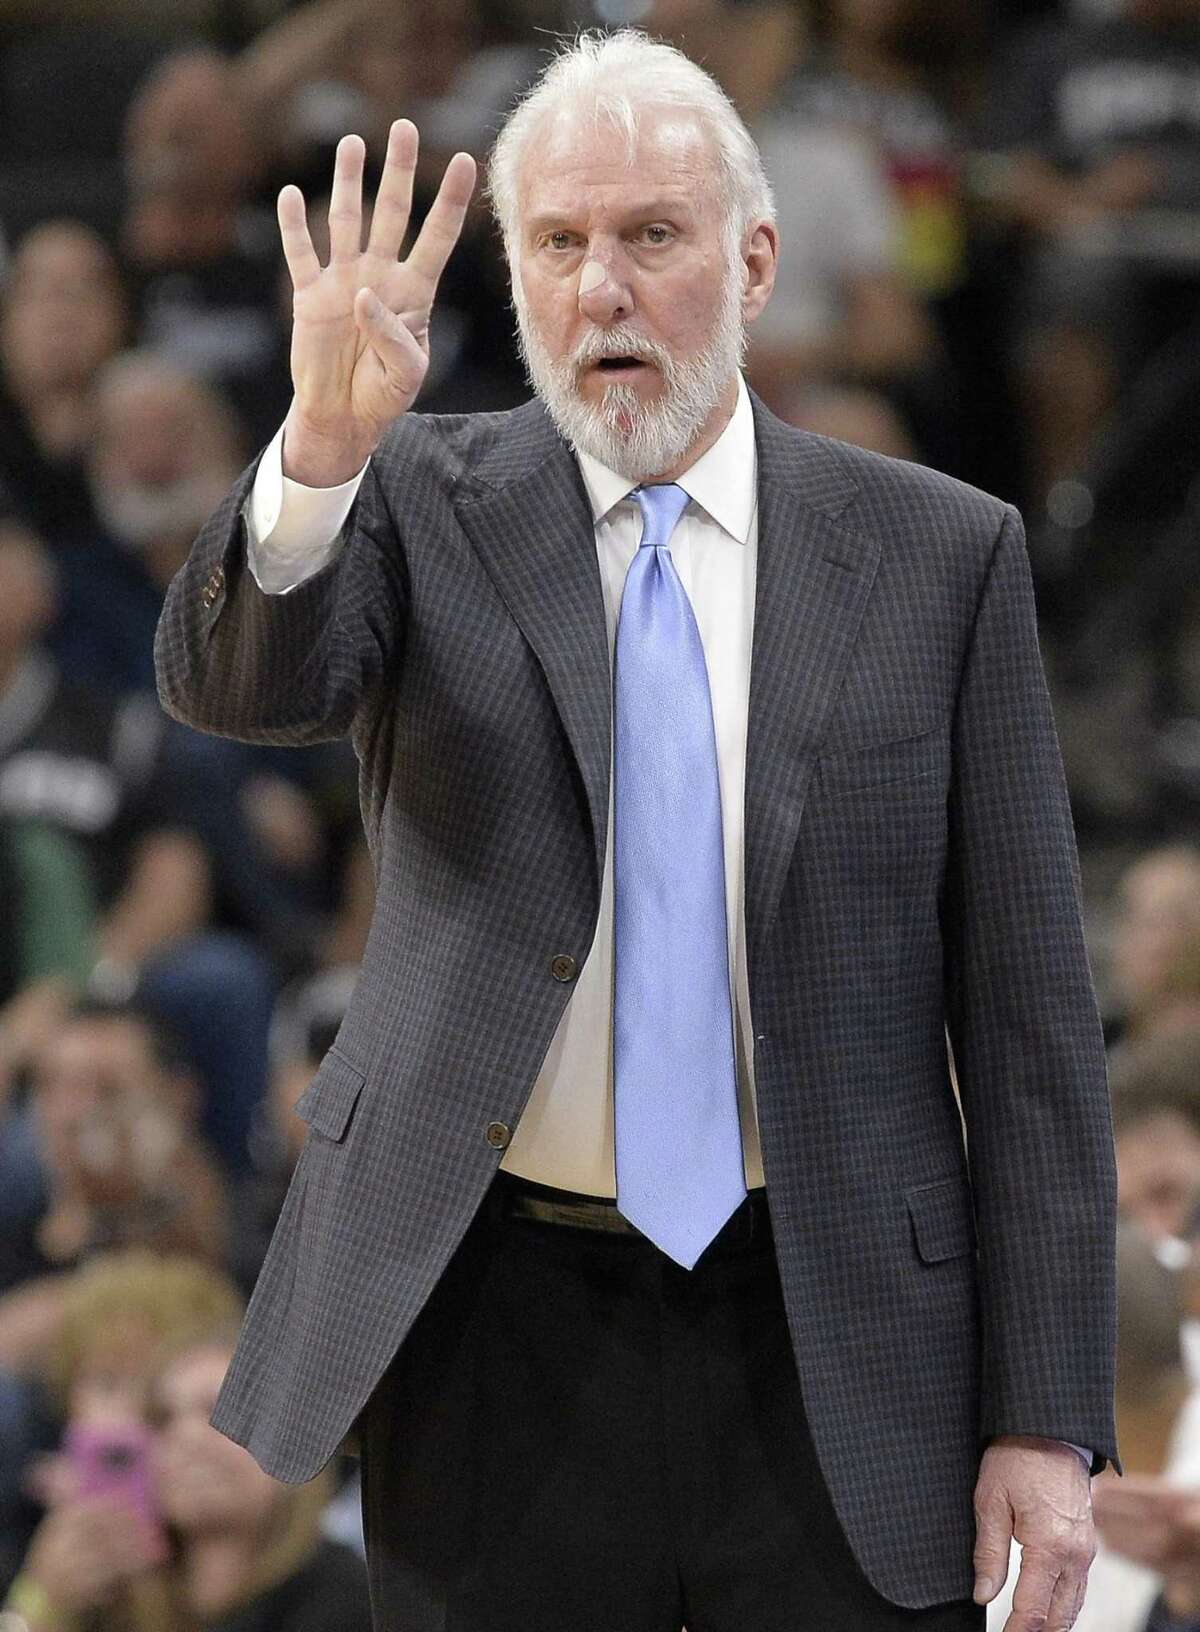 San Antonio Spurs head coach Gregg Popovich signals to his players during the second half of an NBA basketball game against the Memphis Grizzlies, Tuesday, April 4, 2017, in San Antonio. San Antonio won 95-89 in overtime. (AP Photo/Darren Abate)